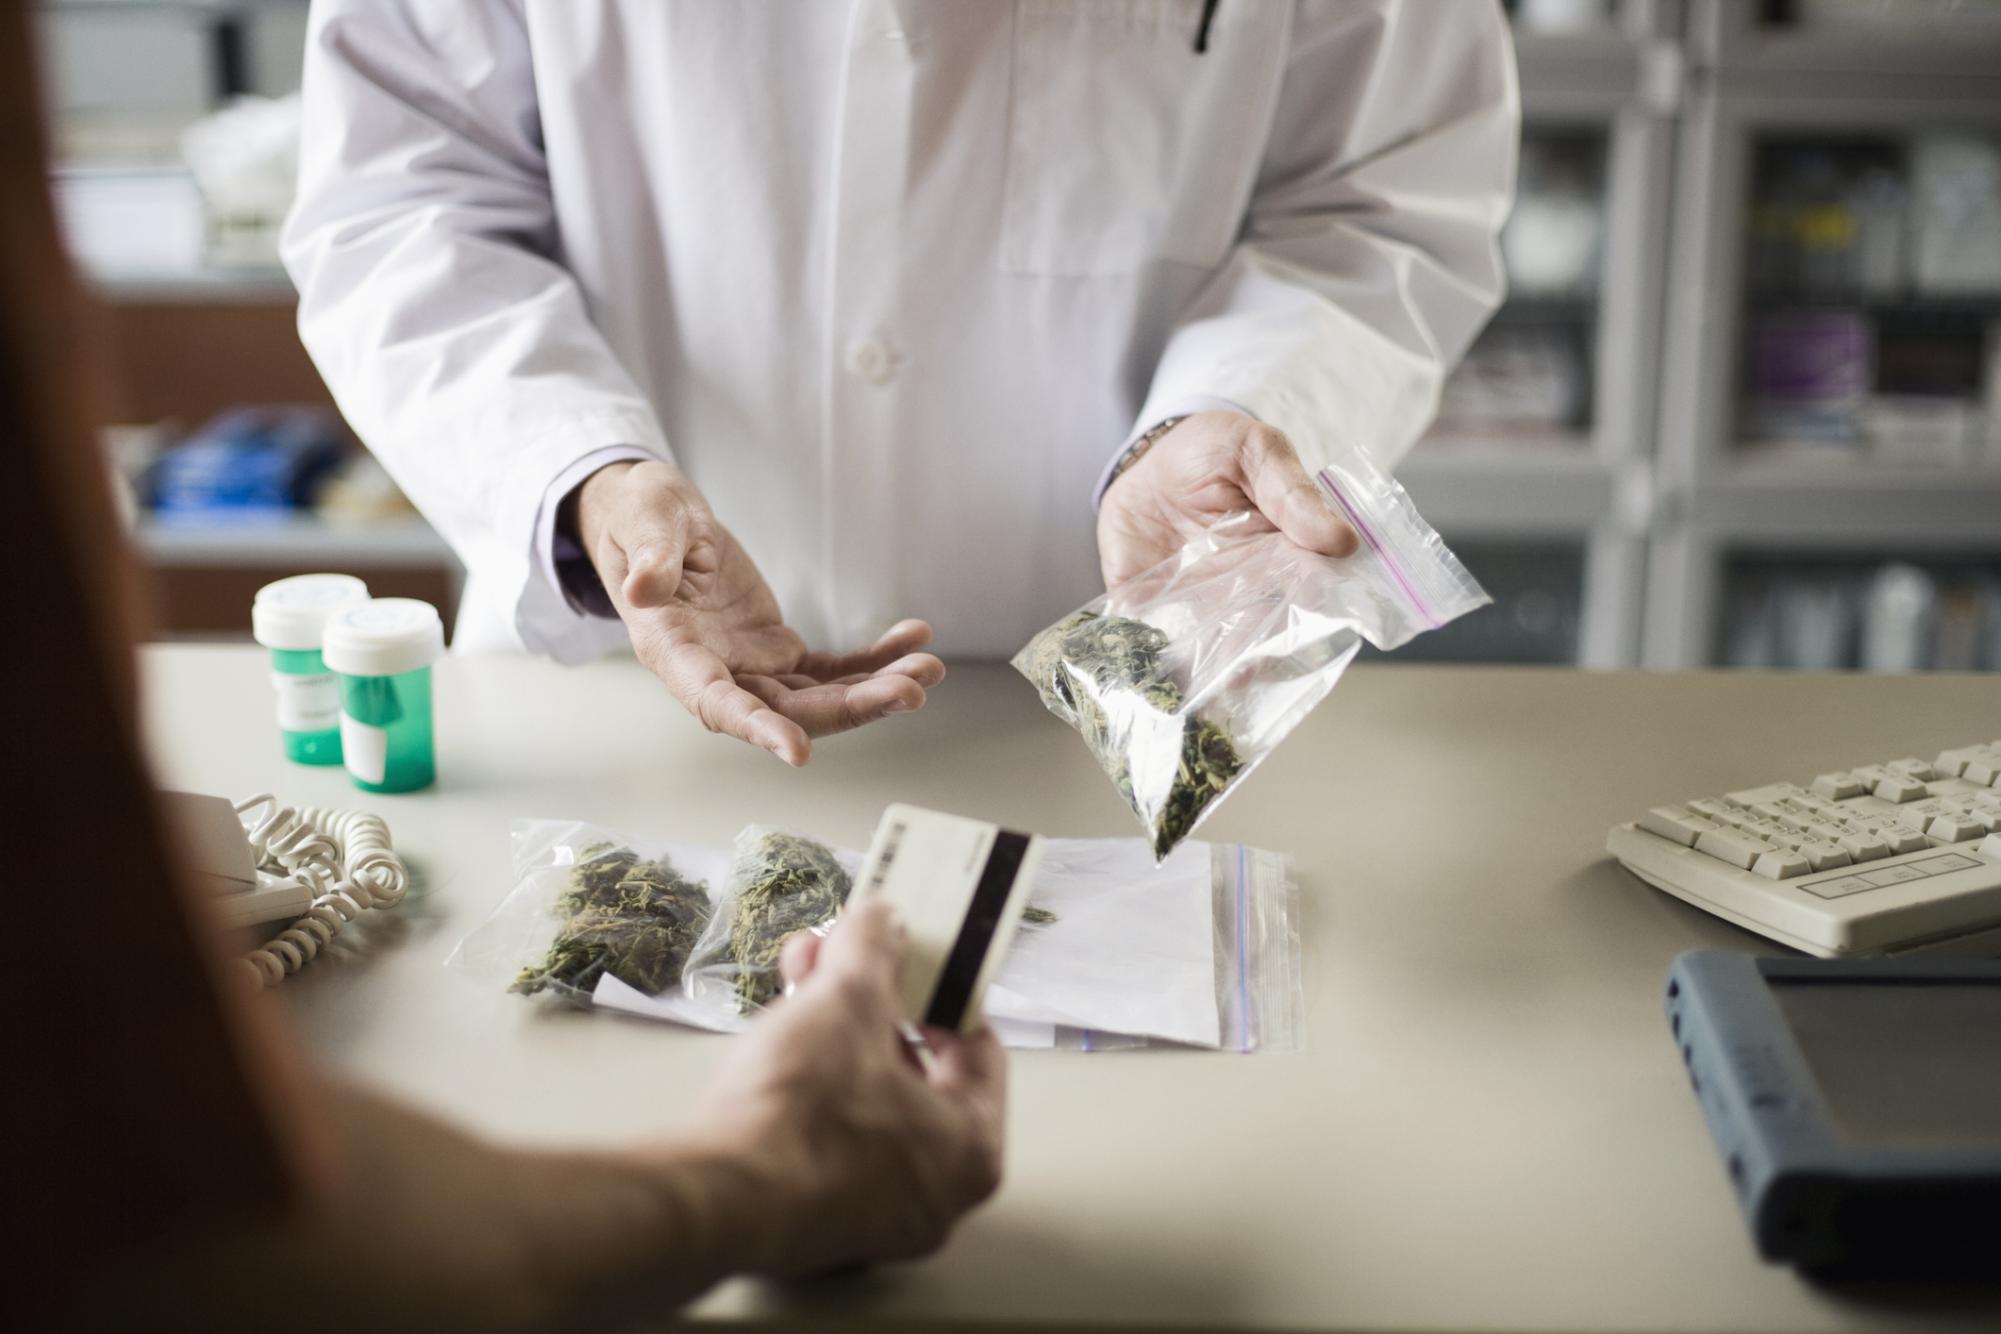 A person hands a card to a person in a lab coat holding a plastic bag. Senior Opinion Columnist Emily Beebe believes a marijuana dispensary is a good addition to DeKalb. (Juniperimages | Getty Images)